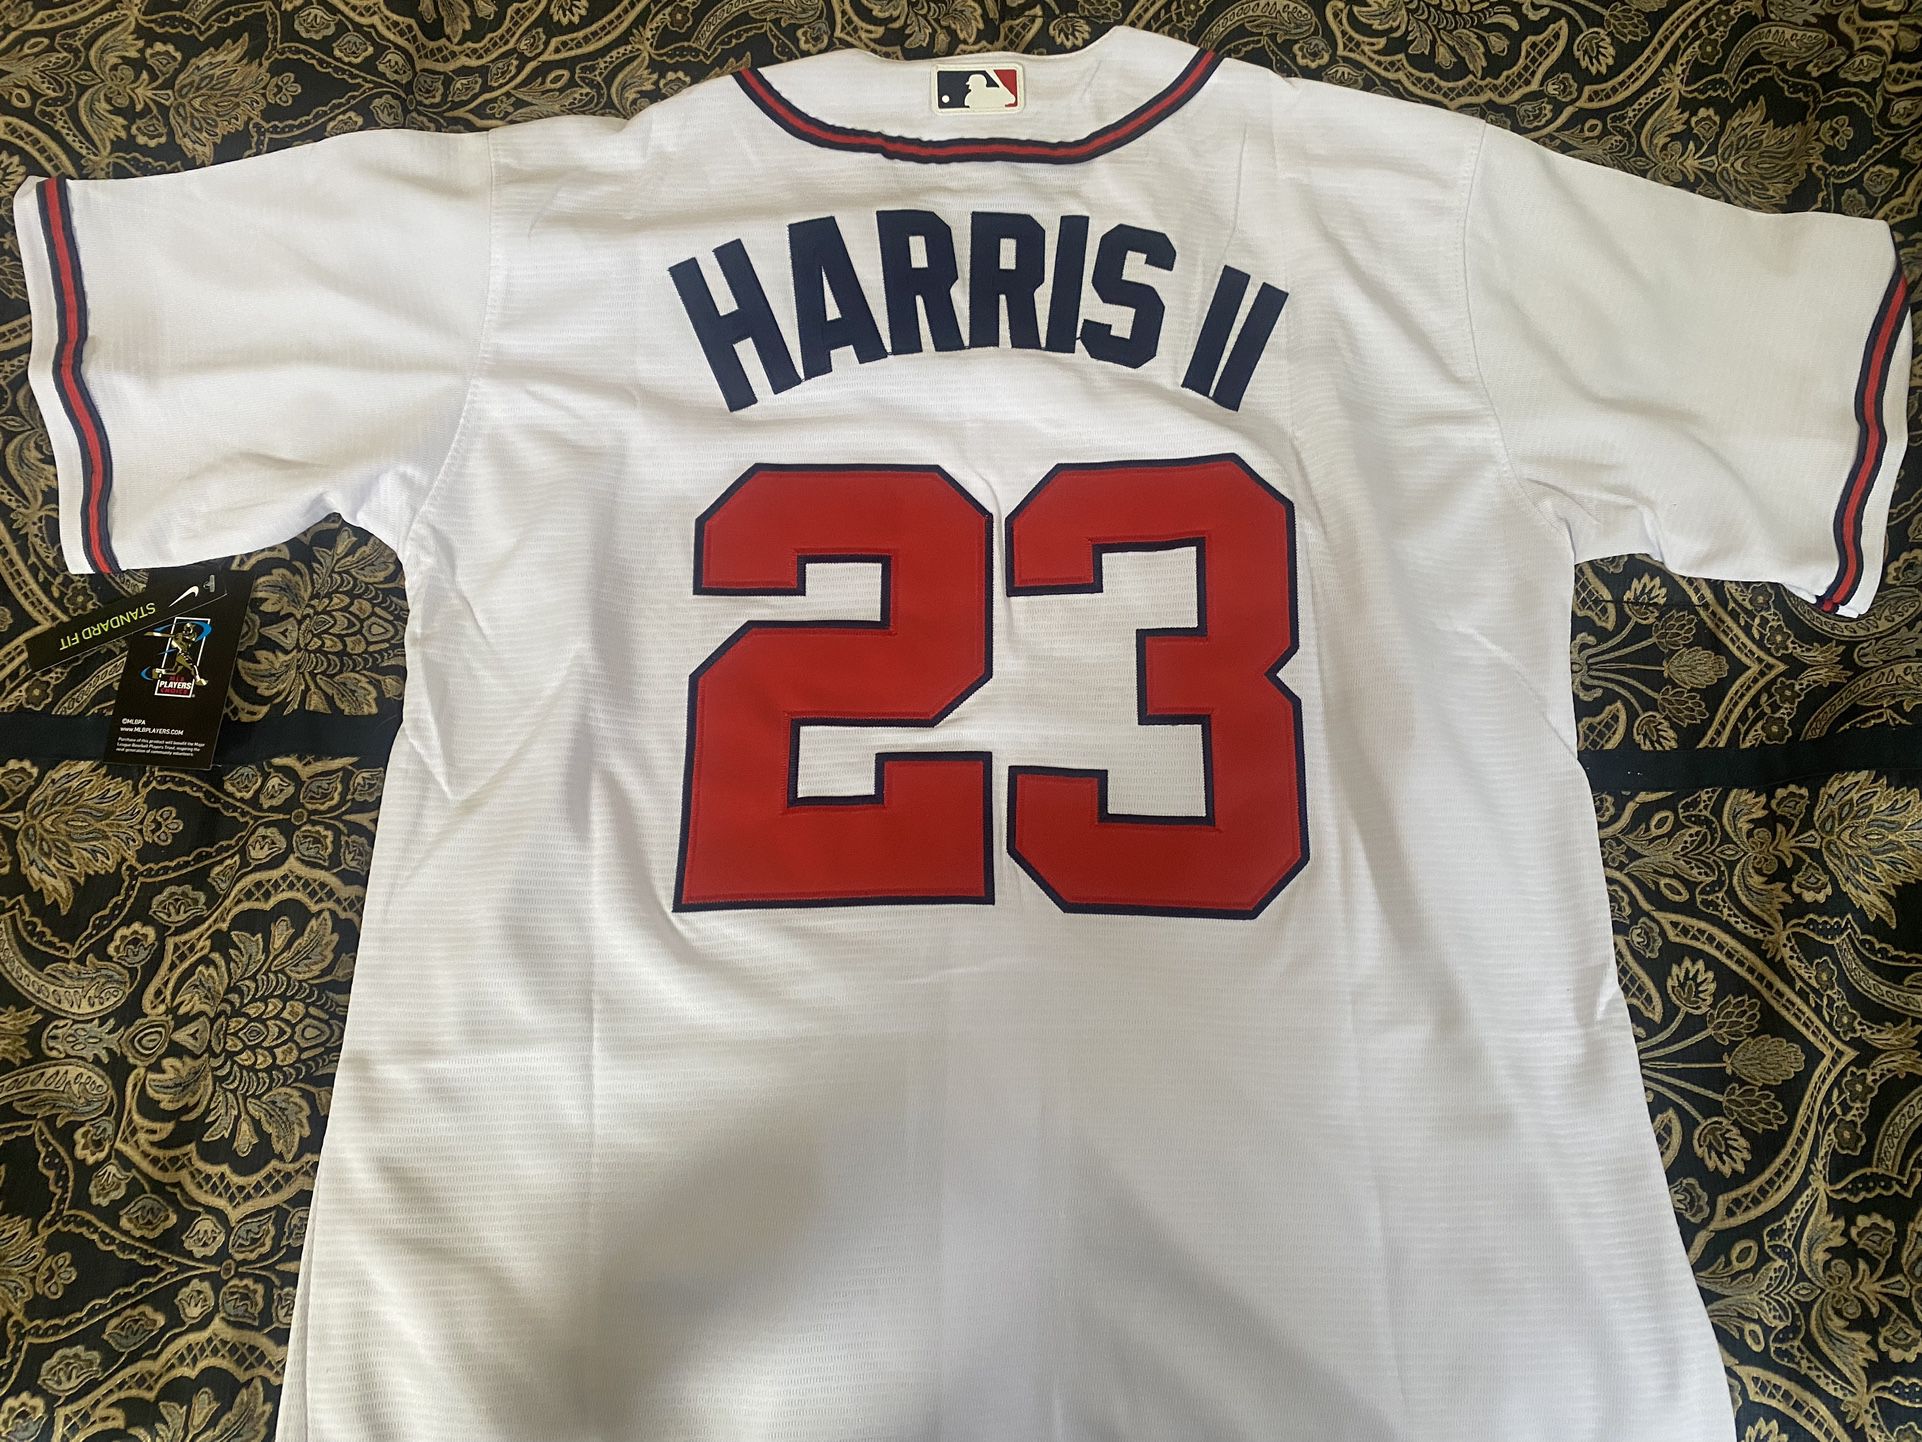 Atlanta Braves #23 Harris Jerseys Adult Sizes Small Up To 3XL for